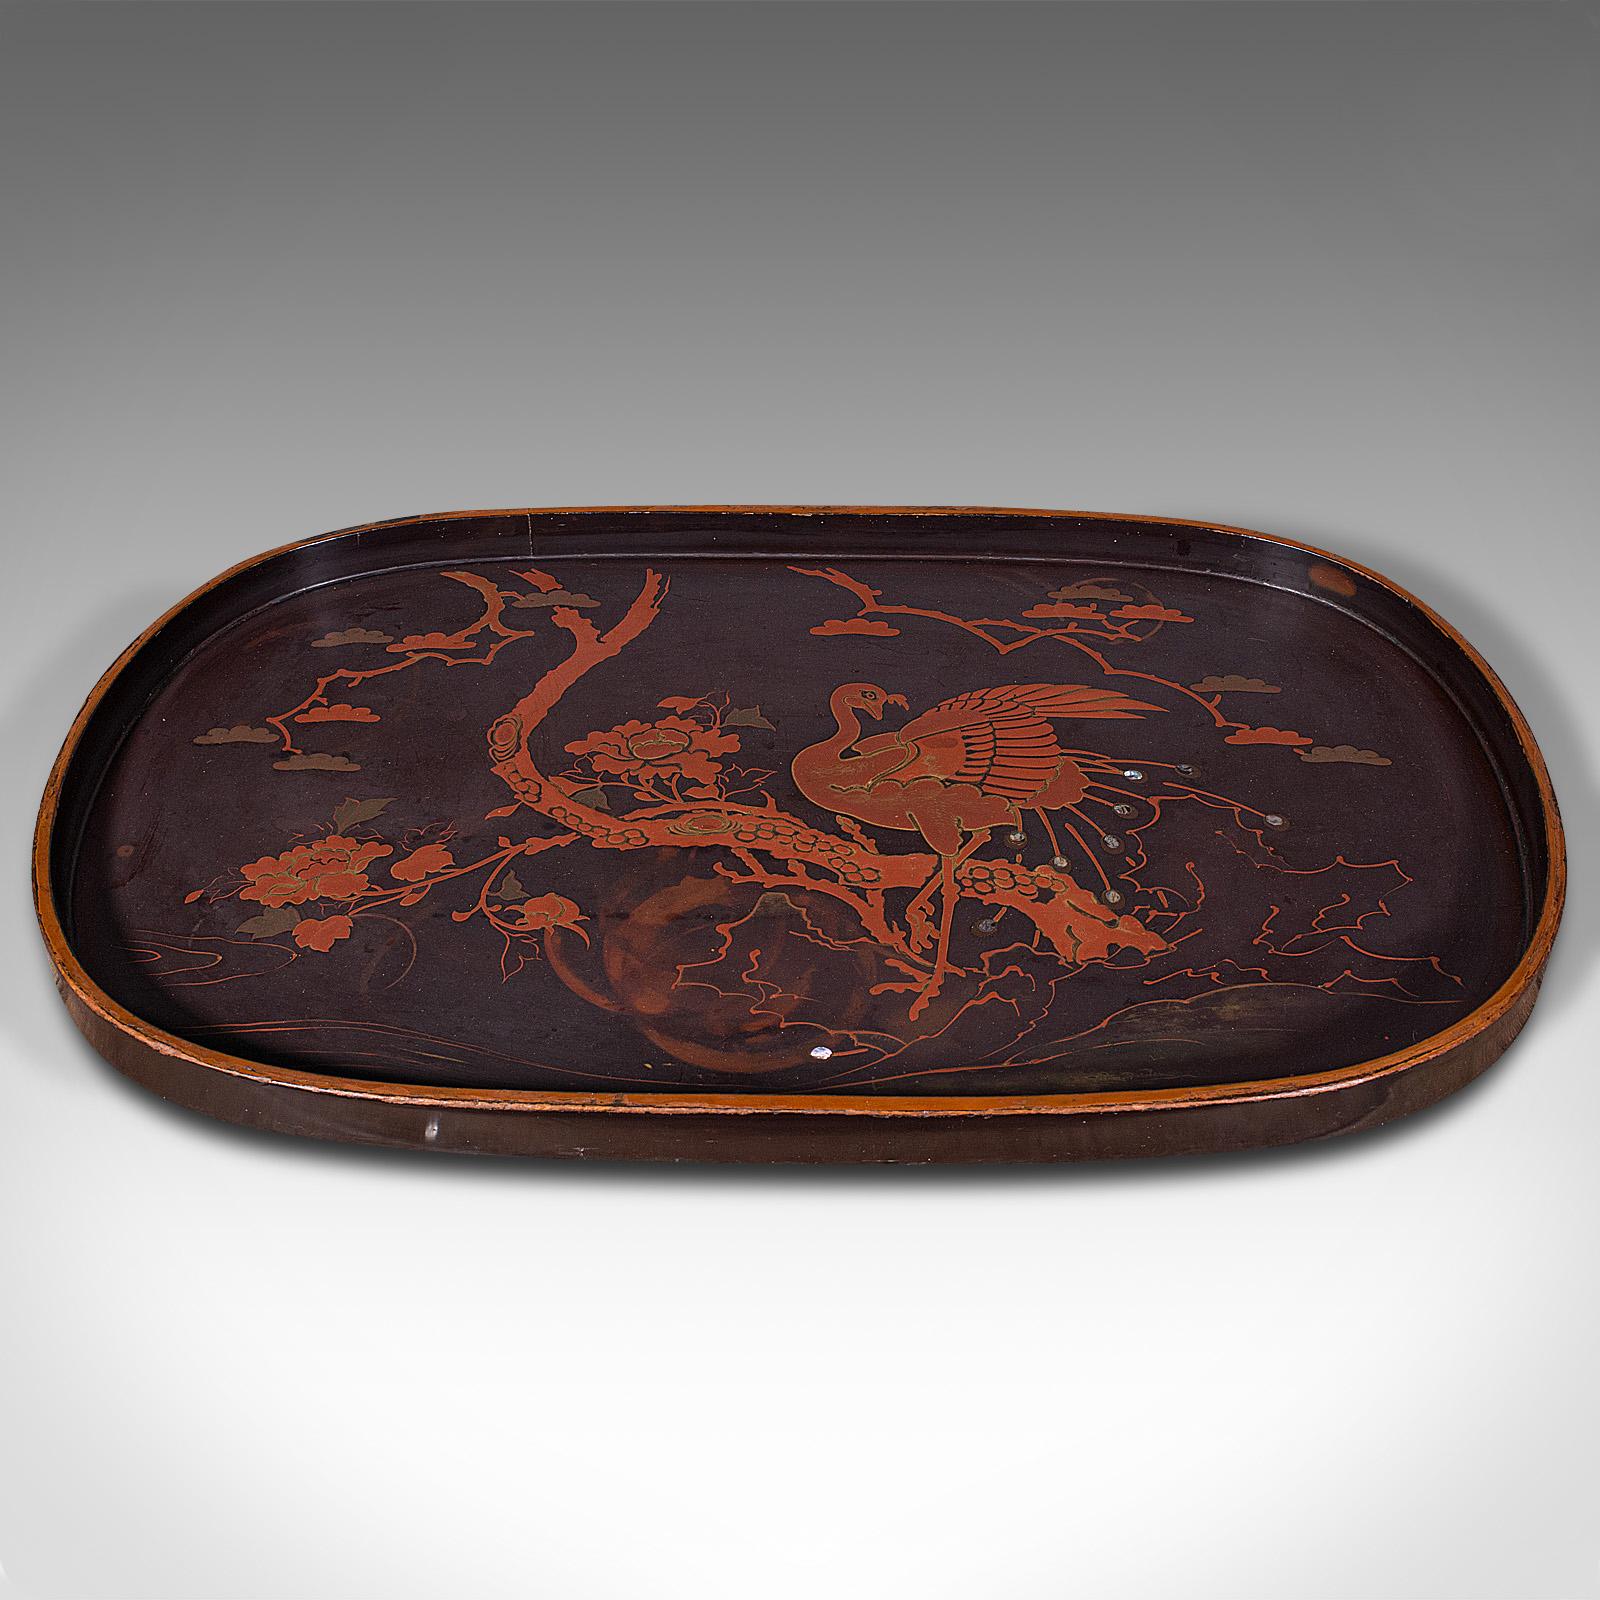 This is a vintage decorative serving tray. An Oriental, Japanned lacquer salver in Art Deco taste, dating to the mid 20th century, circa 1940.

Eye-catching serving tray with strong Oriental Art Deco taste
Displays a desirable aged patina